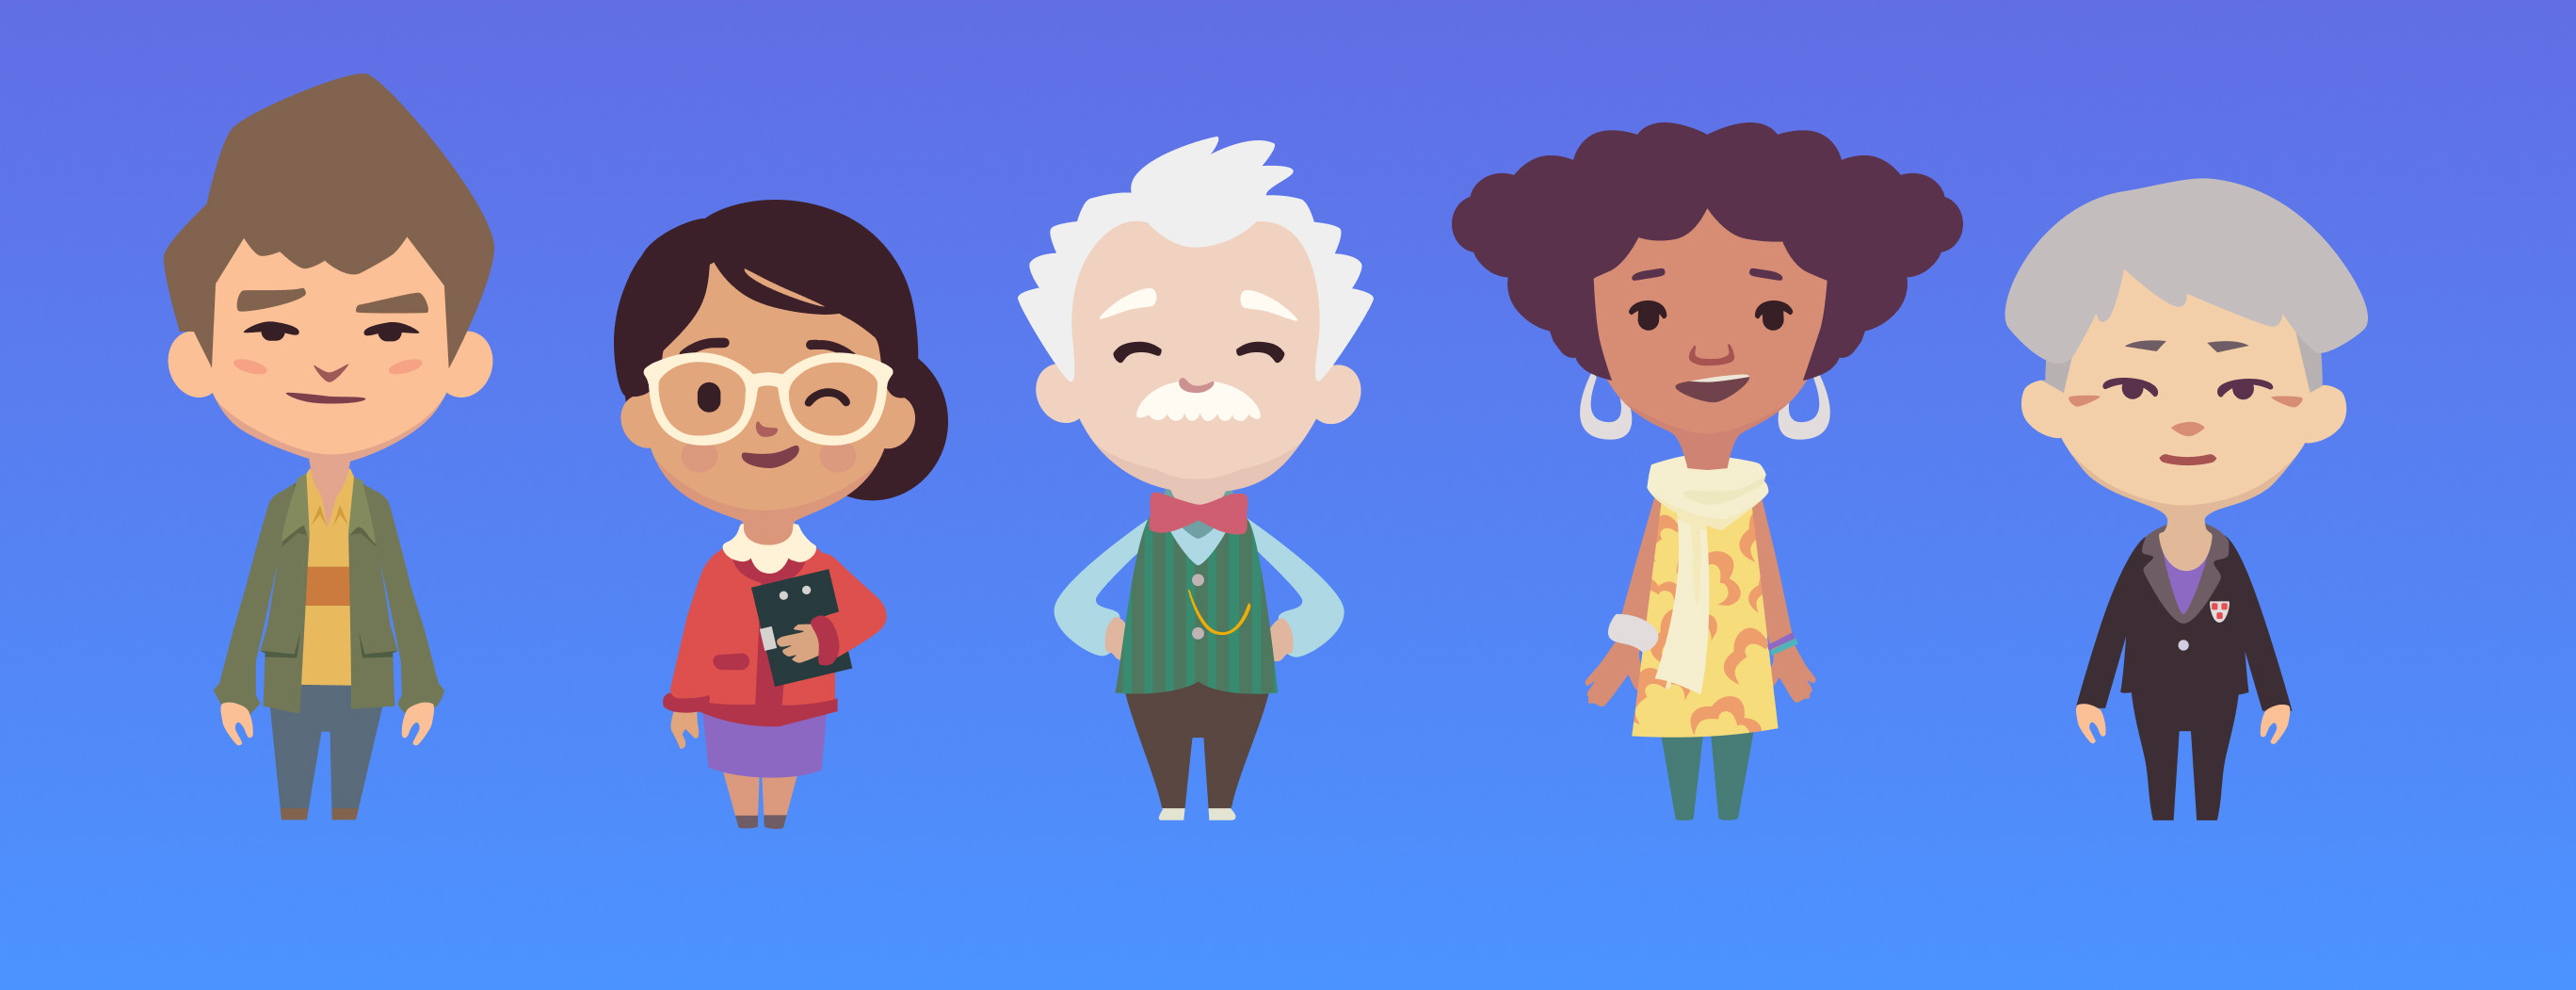 The Capeesh faculty members! These were all made into 3D with sprite animations for their faces. 